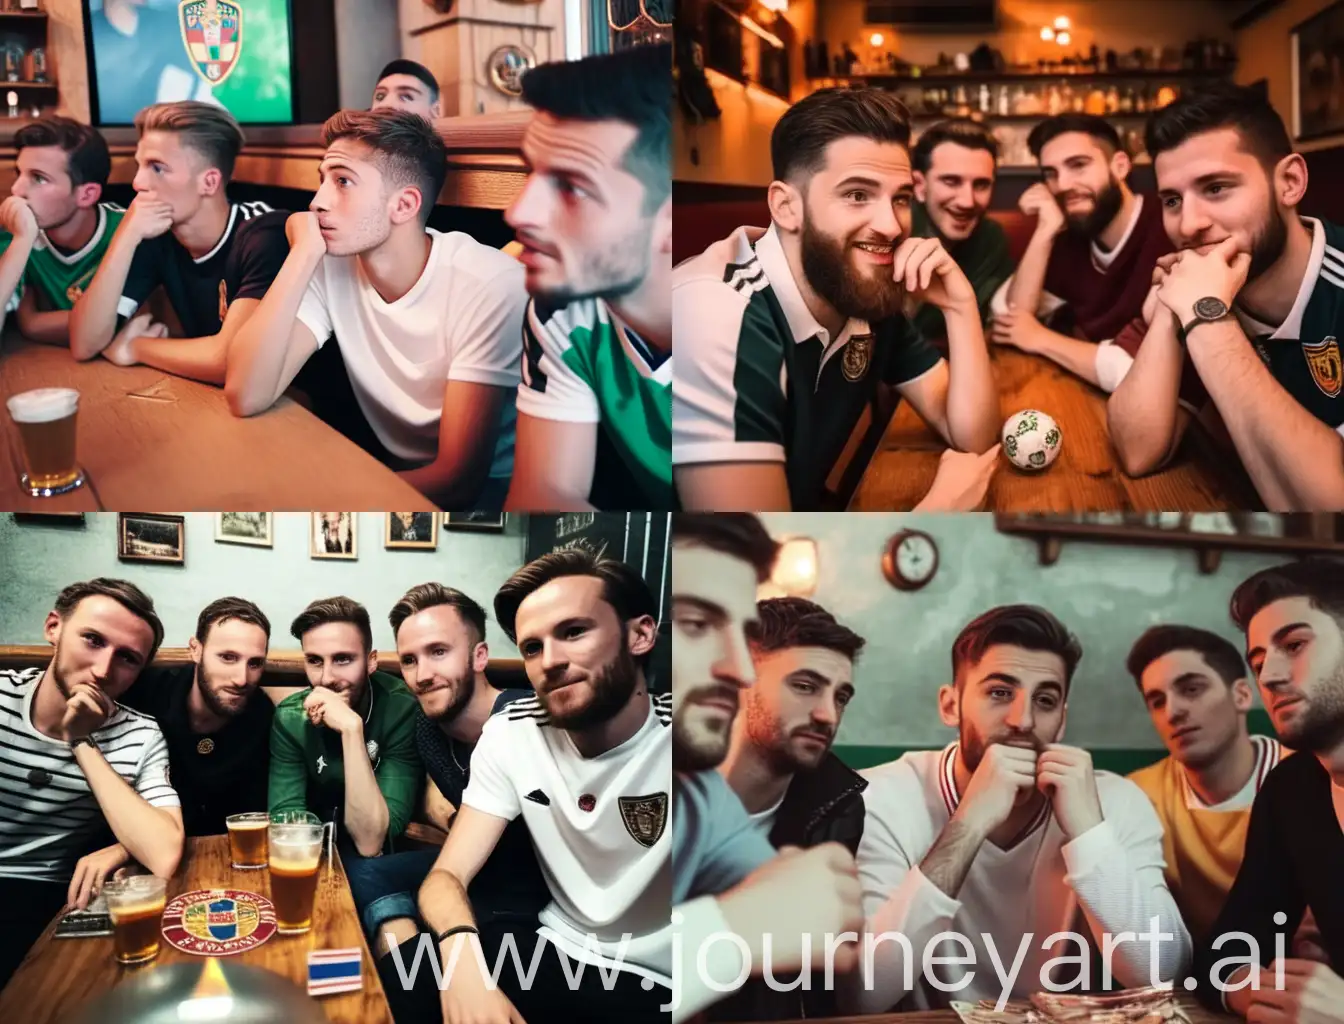 Young-Men-in-Germany-Jerseys-Celebrating-Euro-Cup-Match-in-Lively-Pub-Atmosphere